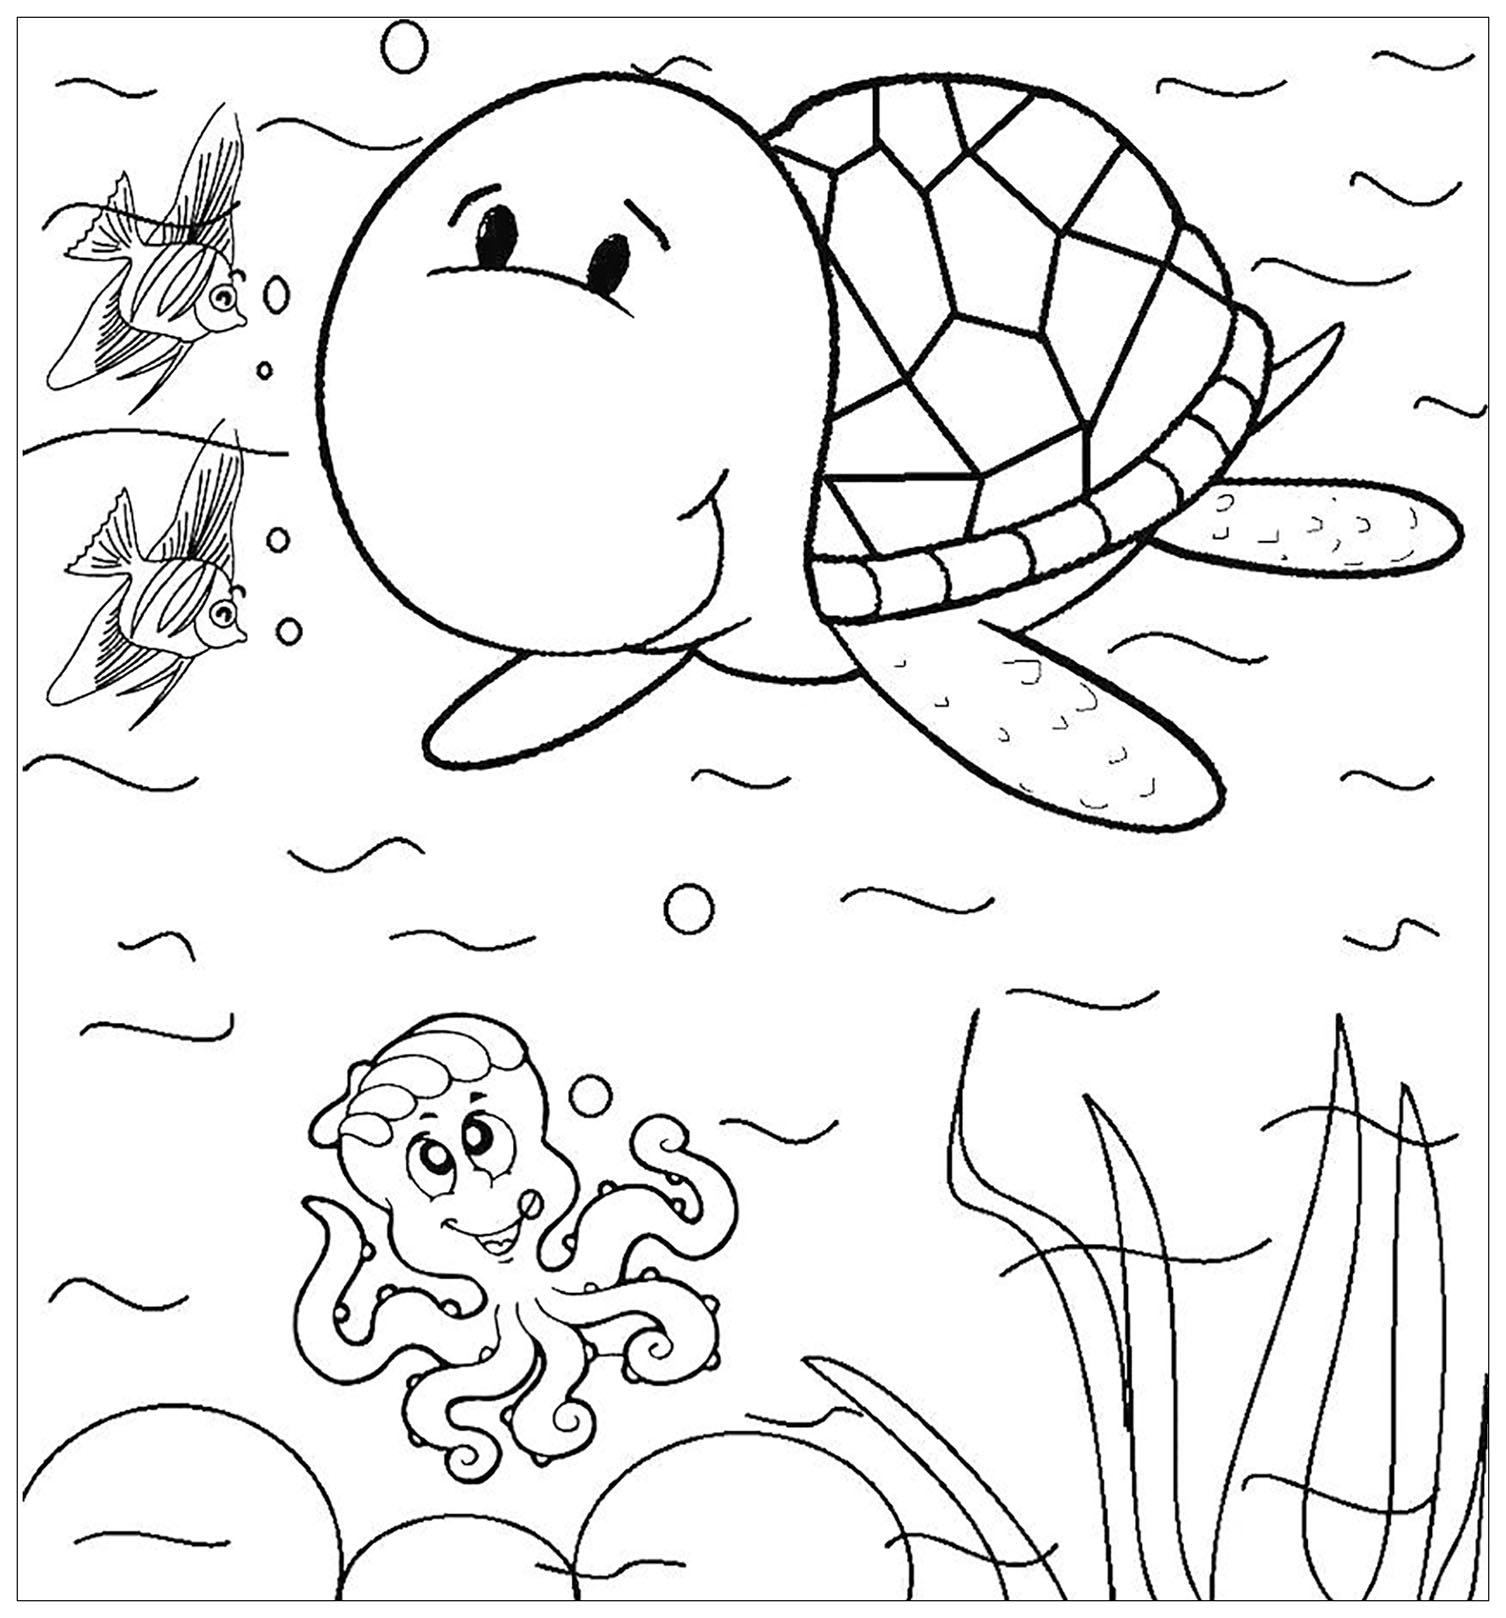 Turtles to print for free   Turtles Kids Coloring Pages